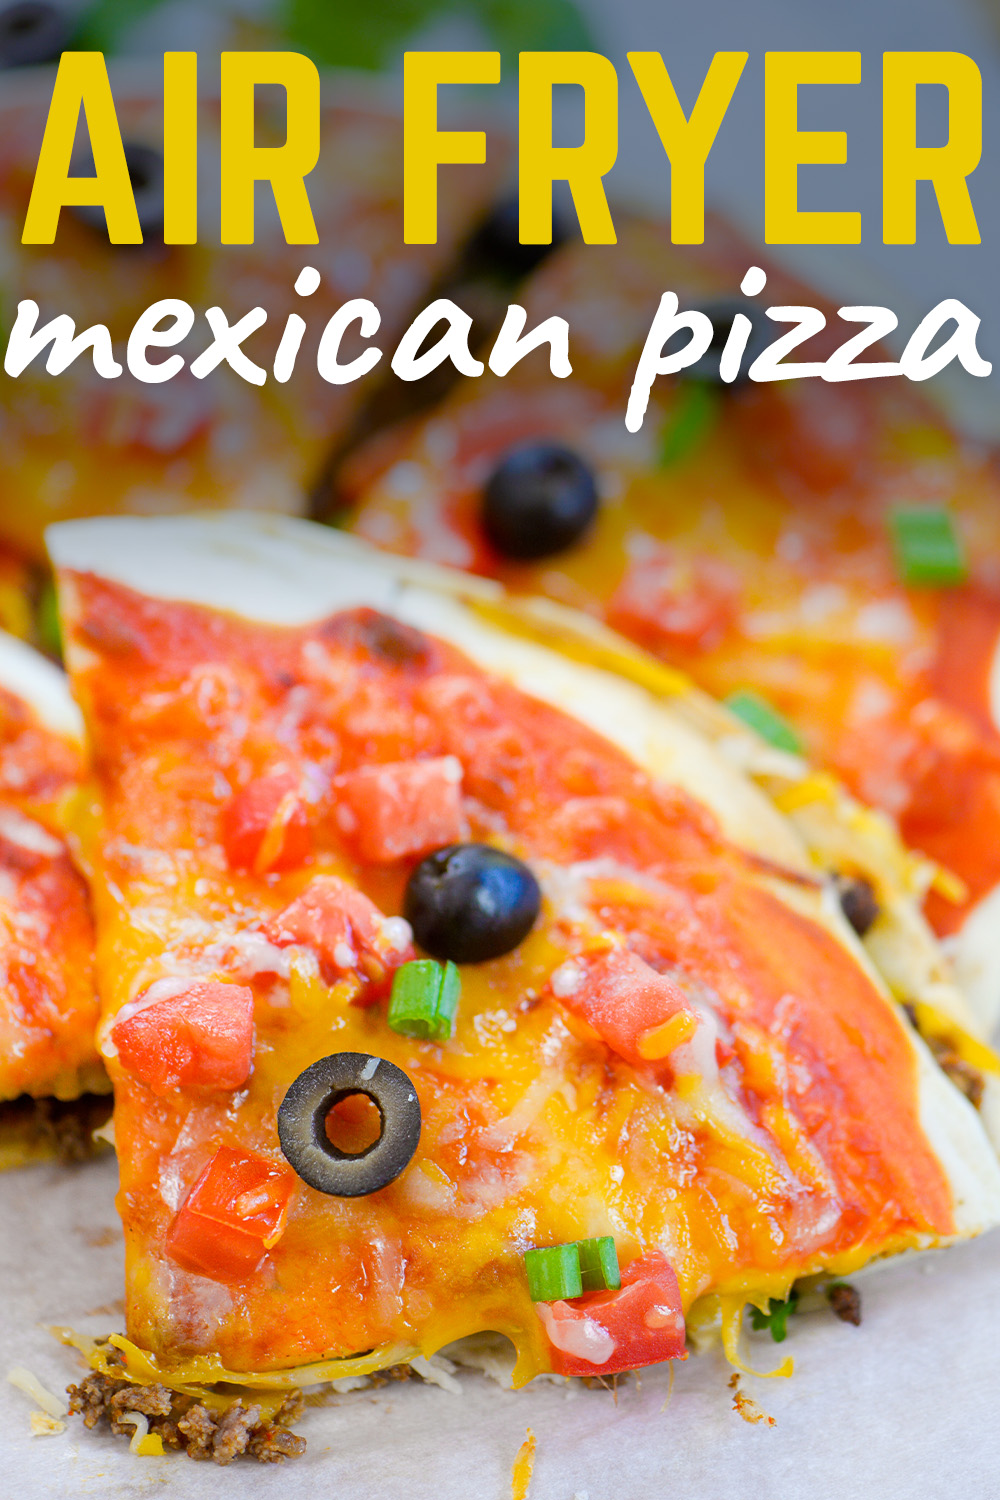 This air fryer Mexican pizza is a fully customizable version of the popular Taco Bell item.  Really simple to make, and the best part is you can add your own toppings!